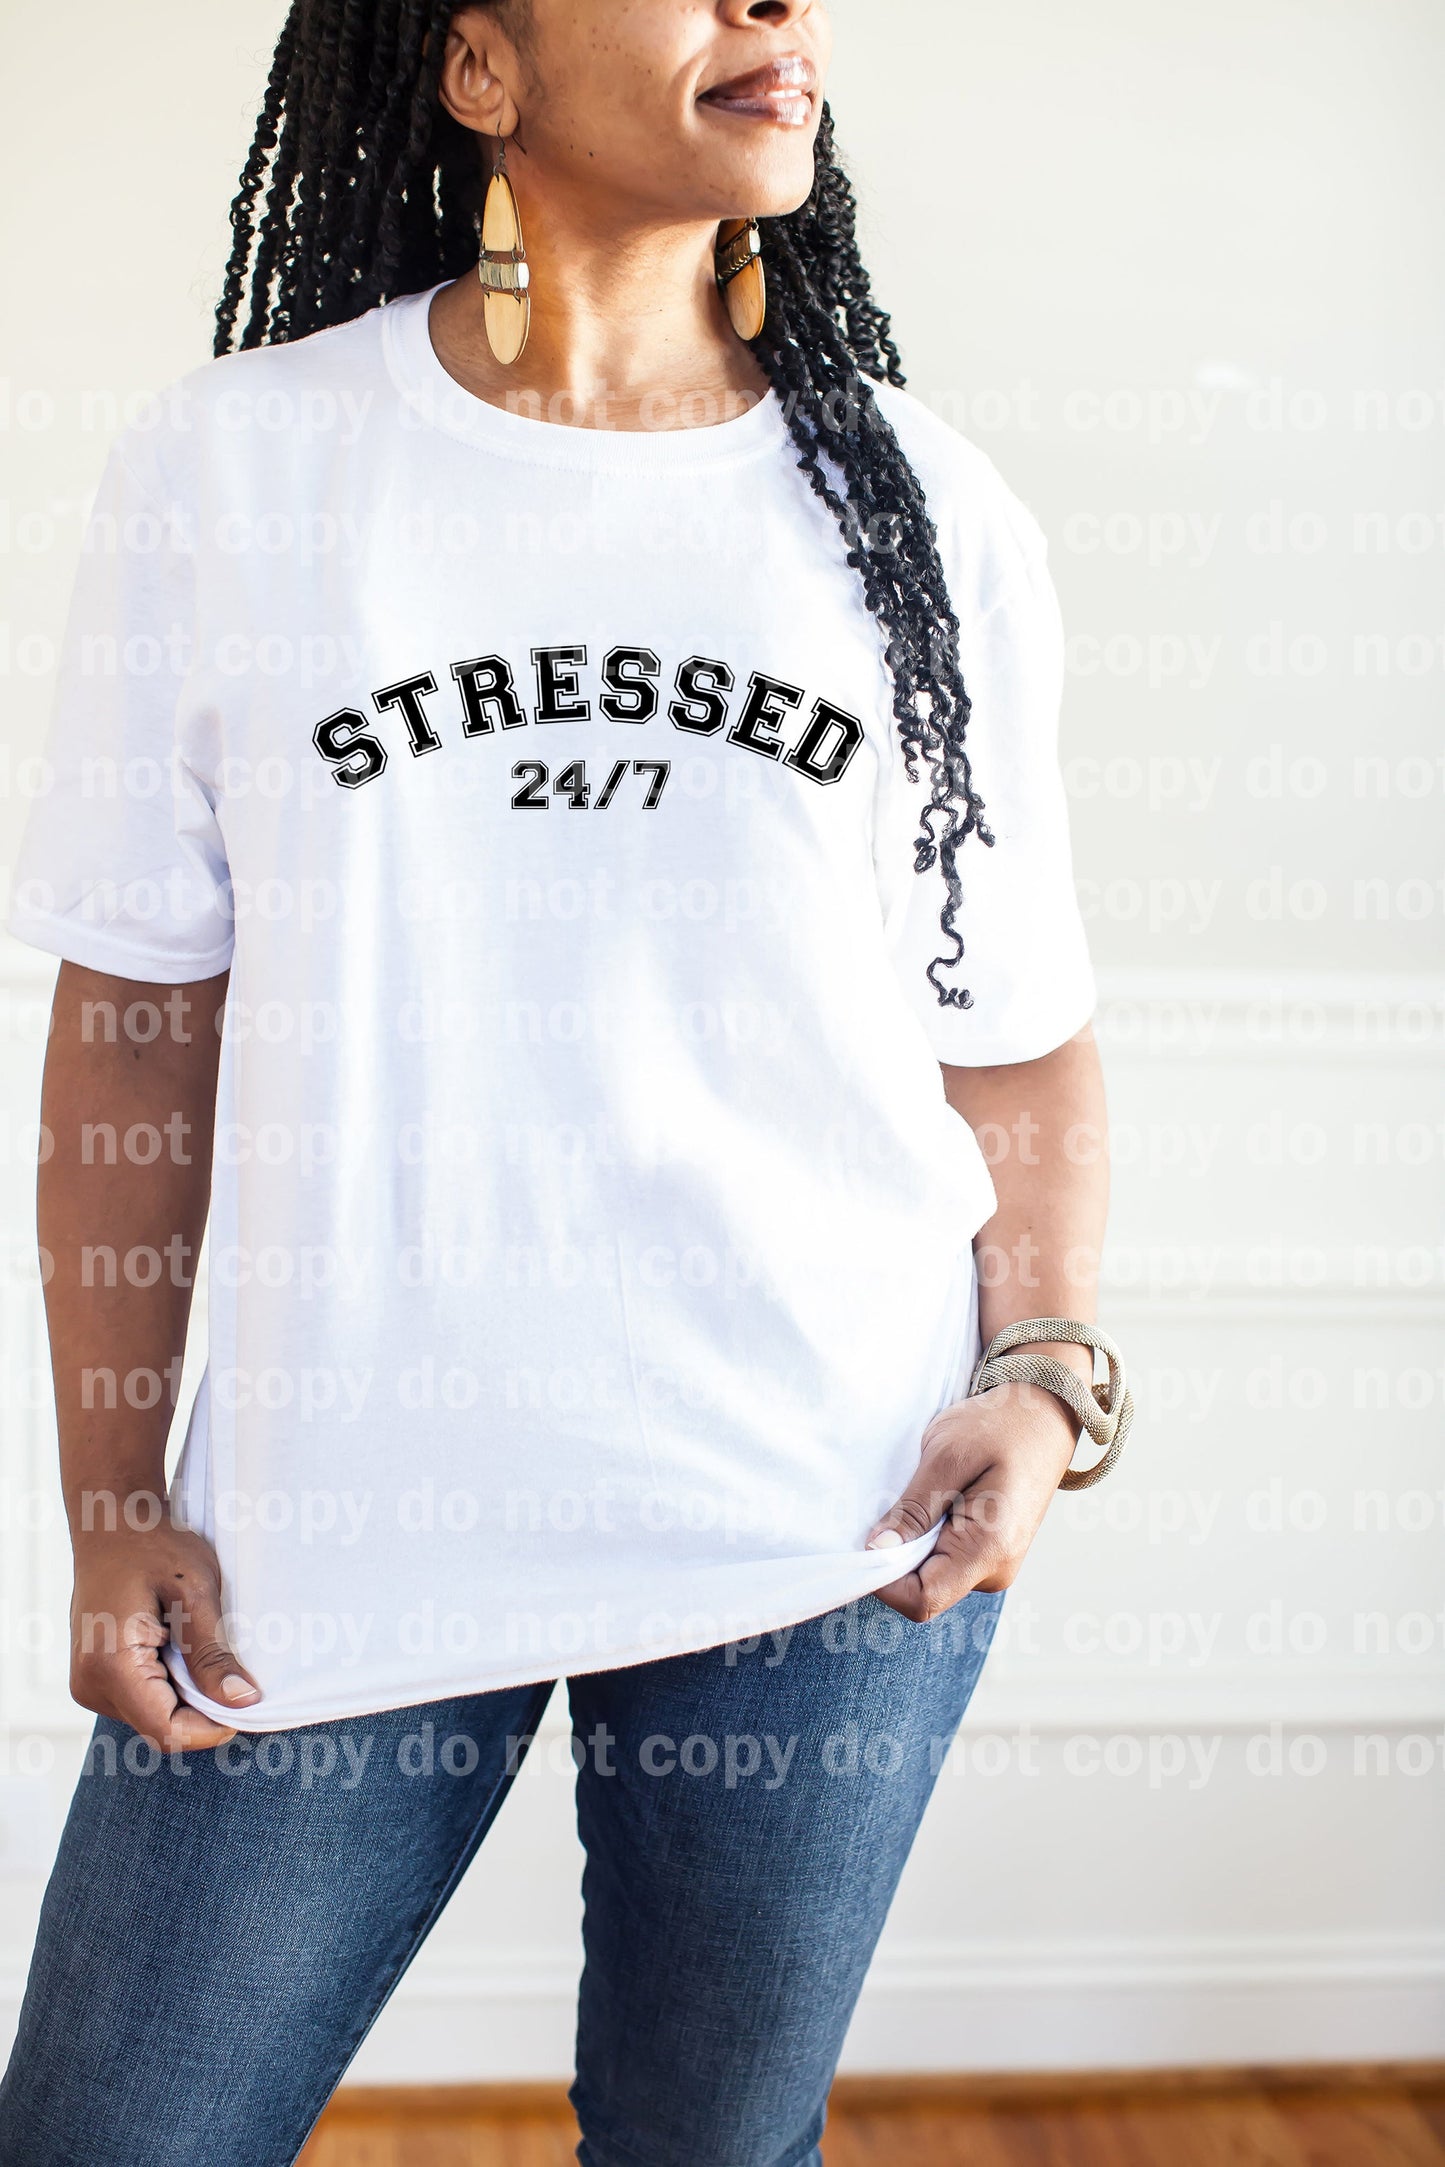 Stressed 24/7 Dream Print or Sublimation Print